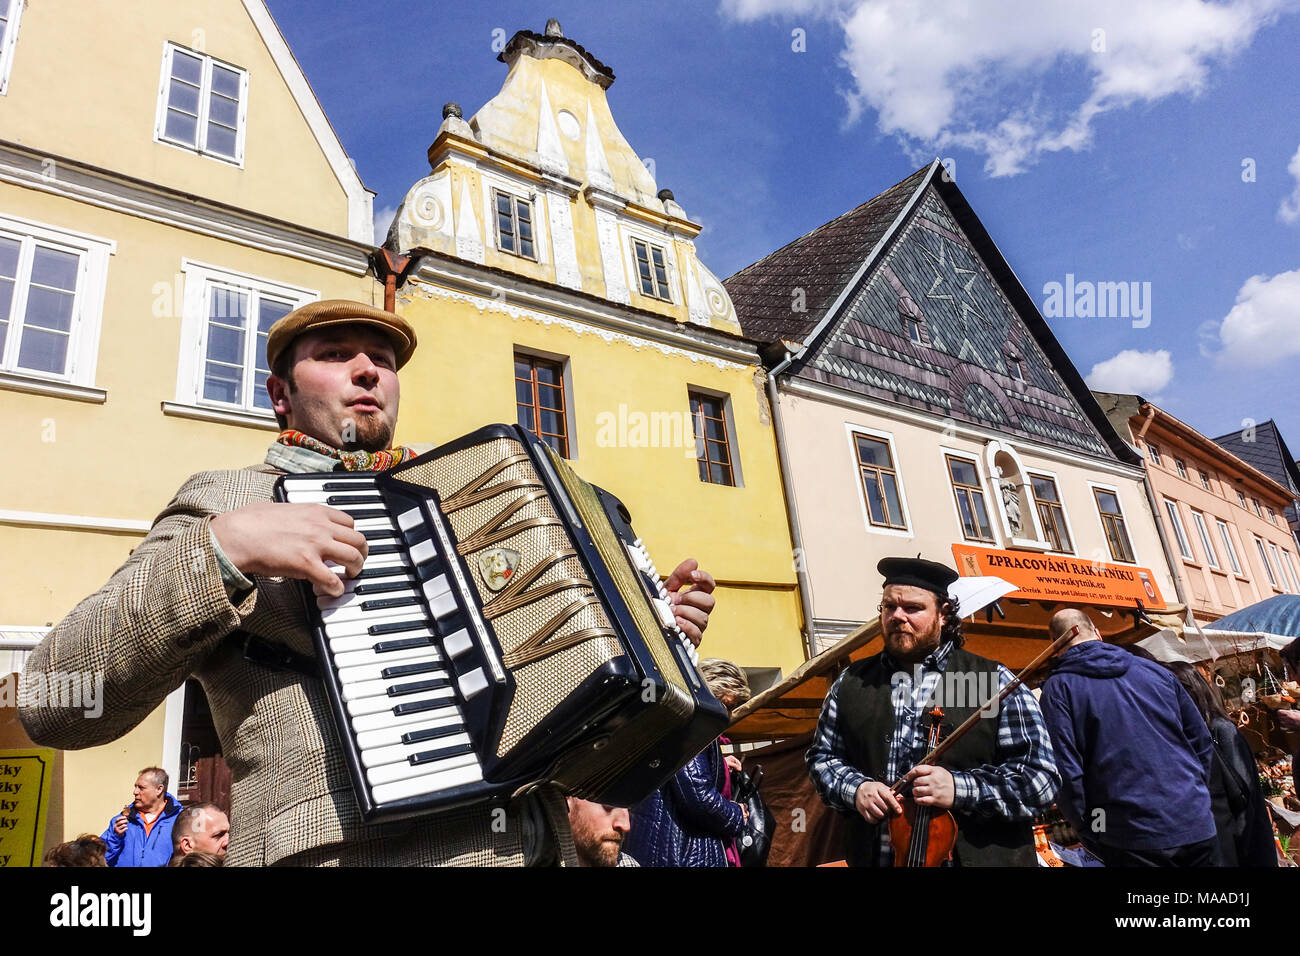 Accordionist plays and sings Old Bohemians songs at the folk fair, Ustek, Czech Republic Stock Photo